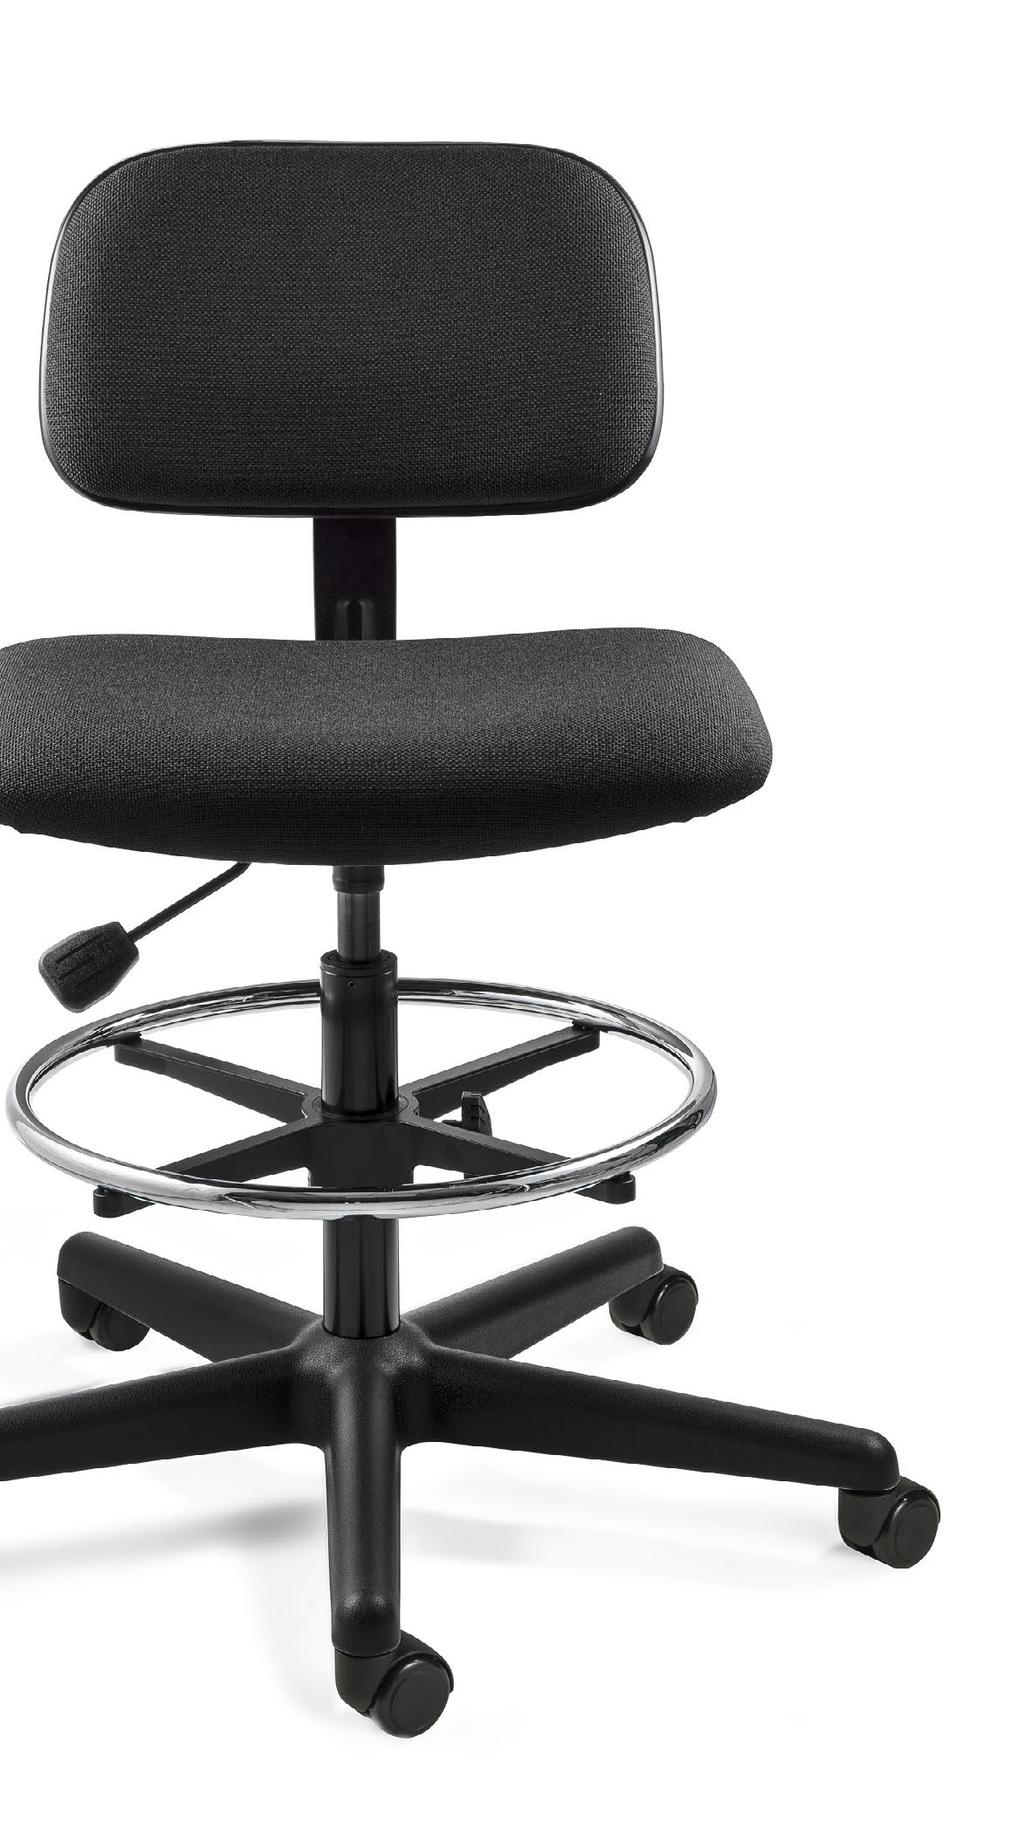 UPHOLSTERED CHAIRS 4000 Series WESTMOUND SERIES BEVCO s WESTMOUND series offer a wide contoured seat as well as a curved backrest with scuff resistant back pan for improved lumbar support and